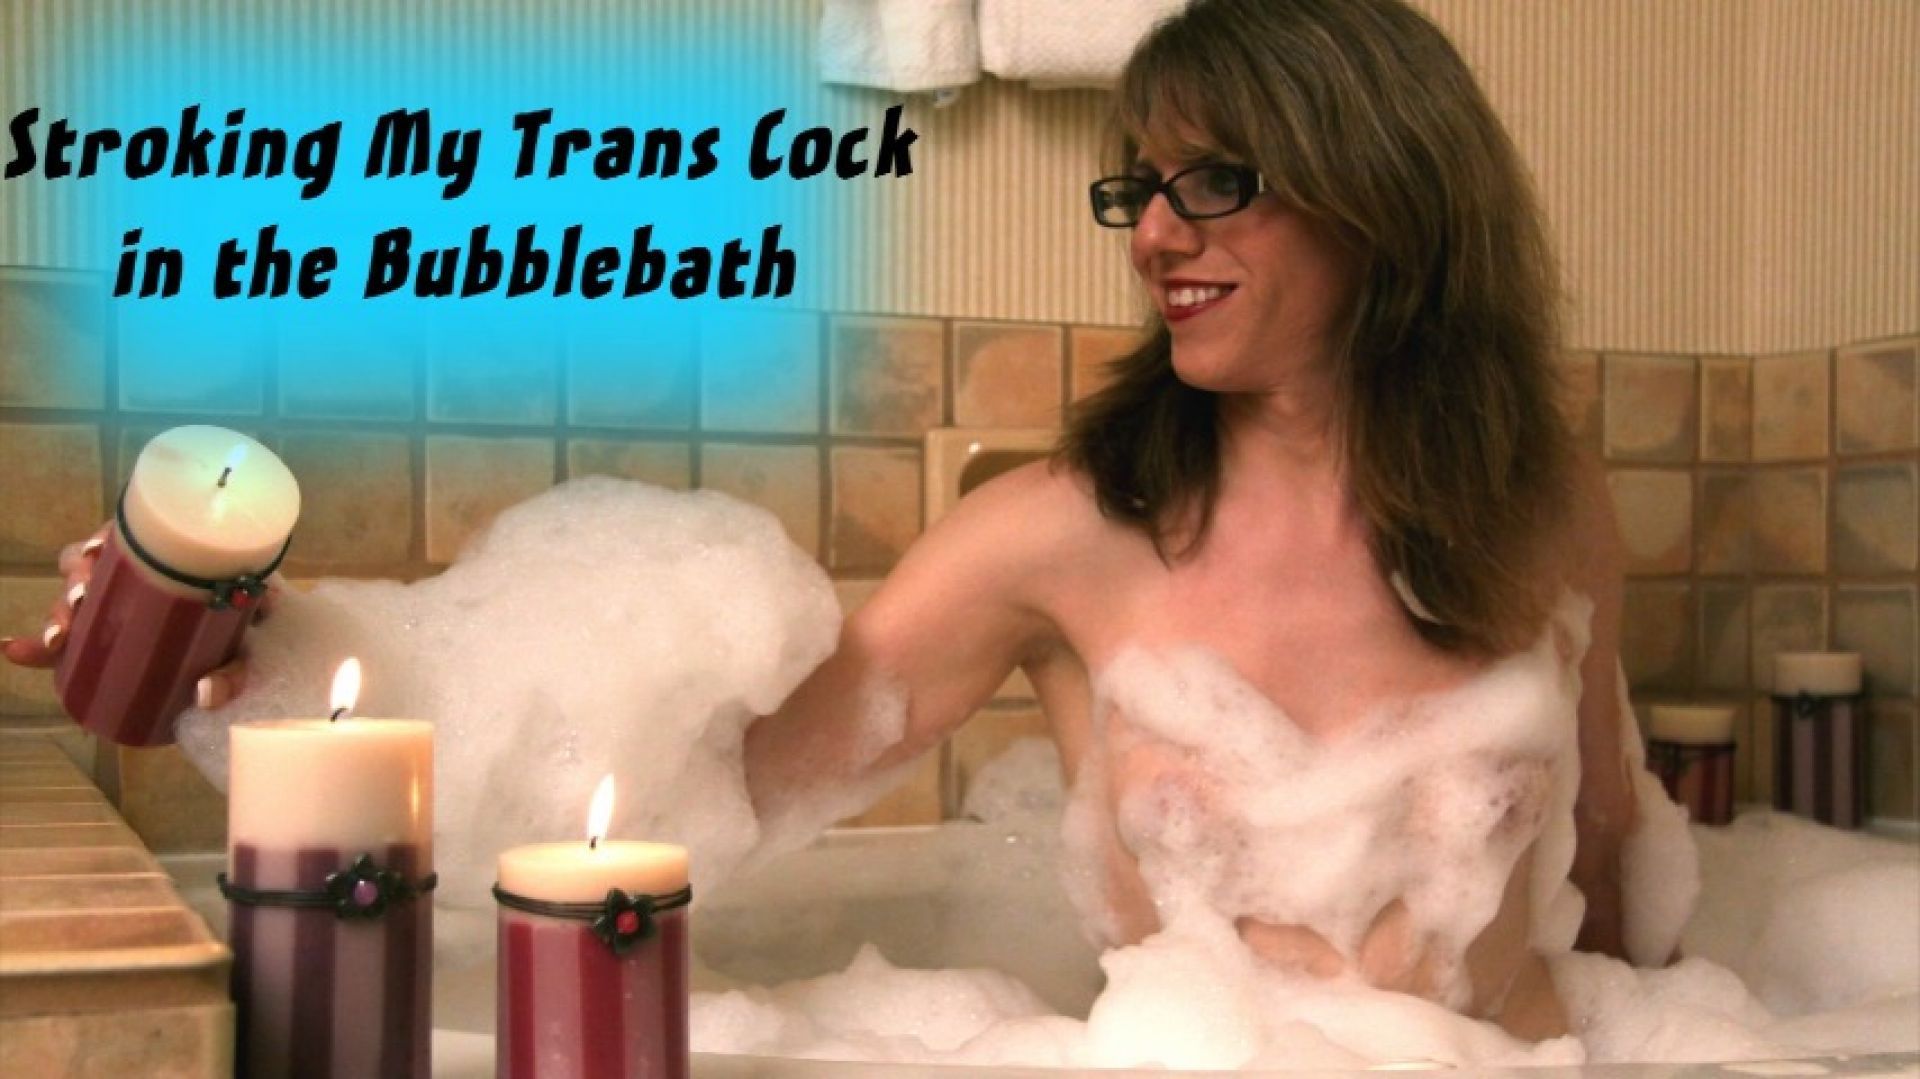 Stroking my Trans Cock in the Bubblebath